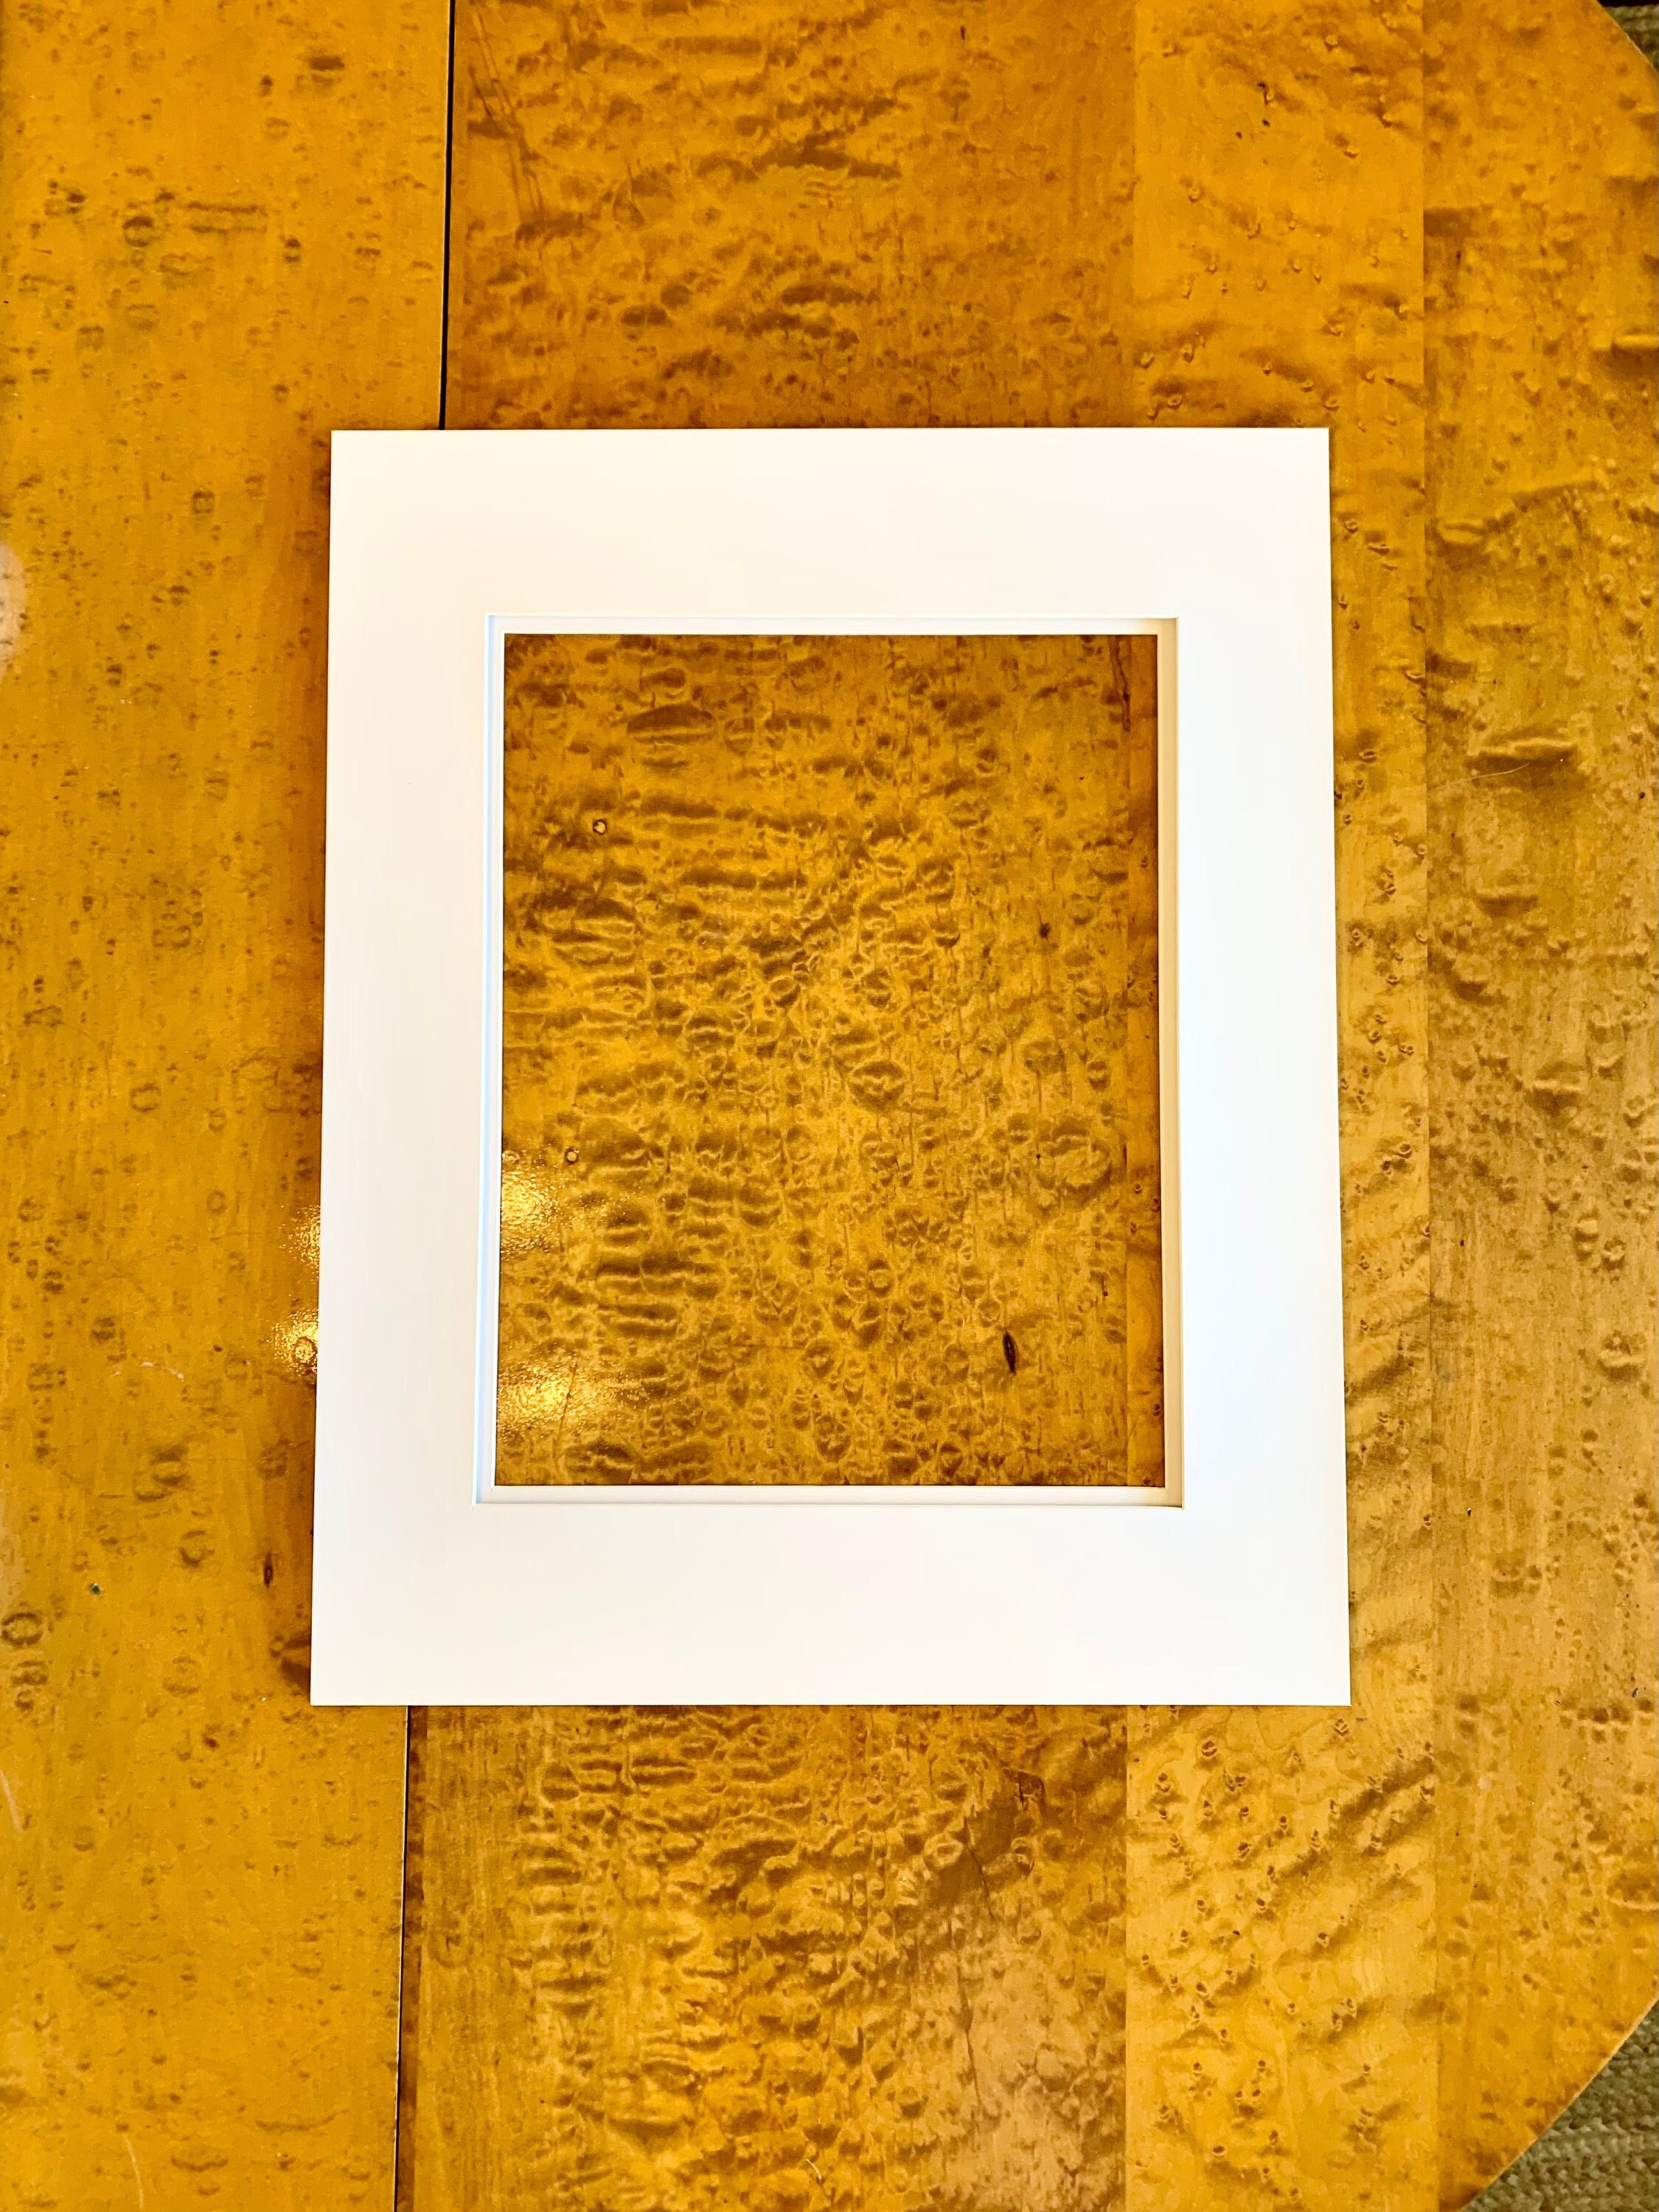 20x30 Mat Bevel Cut for 18x27 Photos - Acid Free Oyster Shell White Precut  Matboard - For Pictures, Photos, Framing - On Sale - Bed Bath & Beyond -  38492317